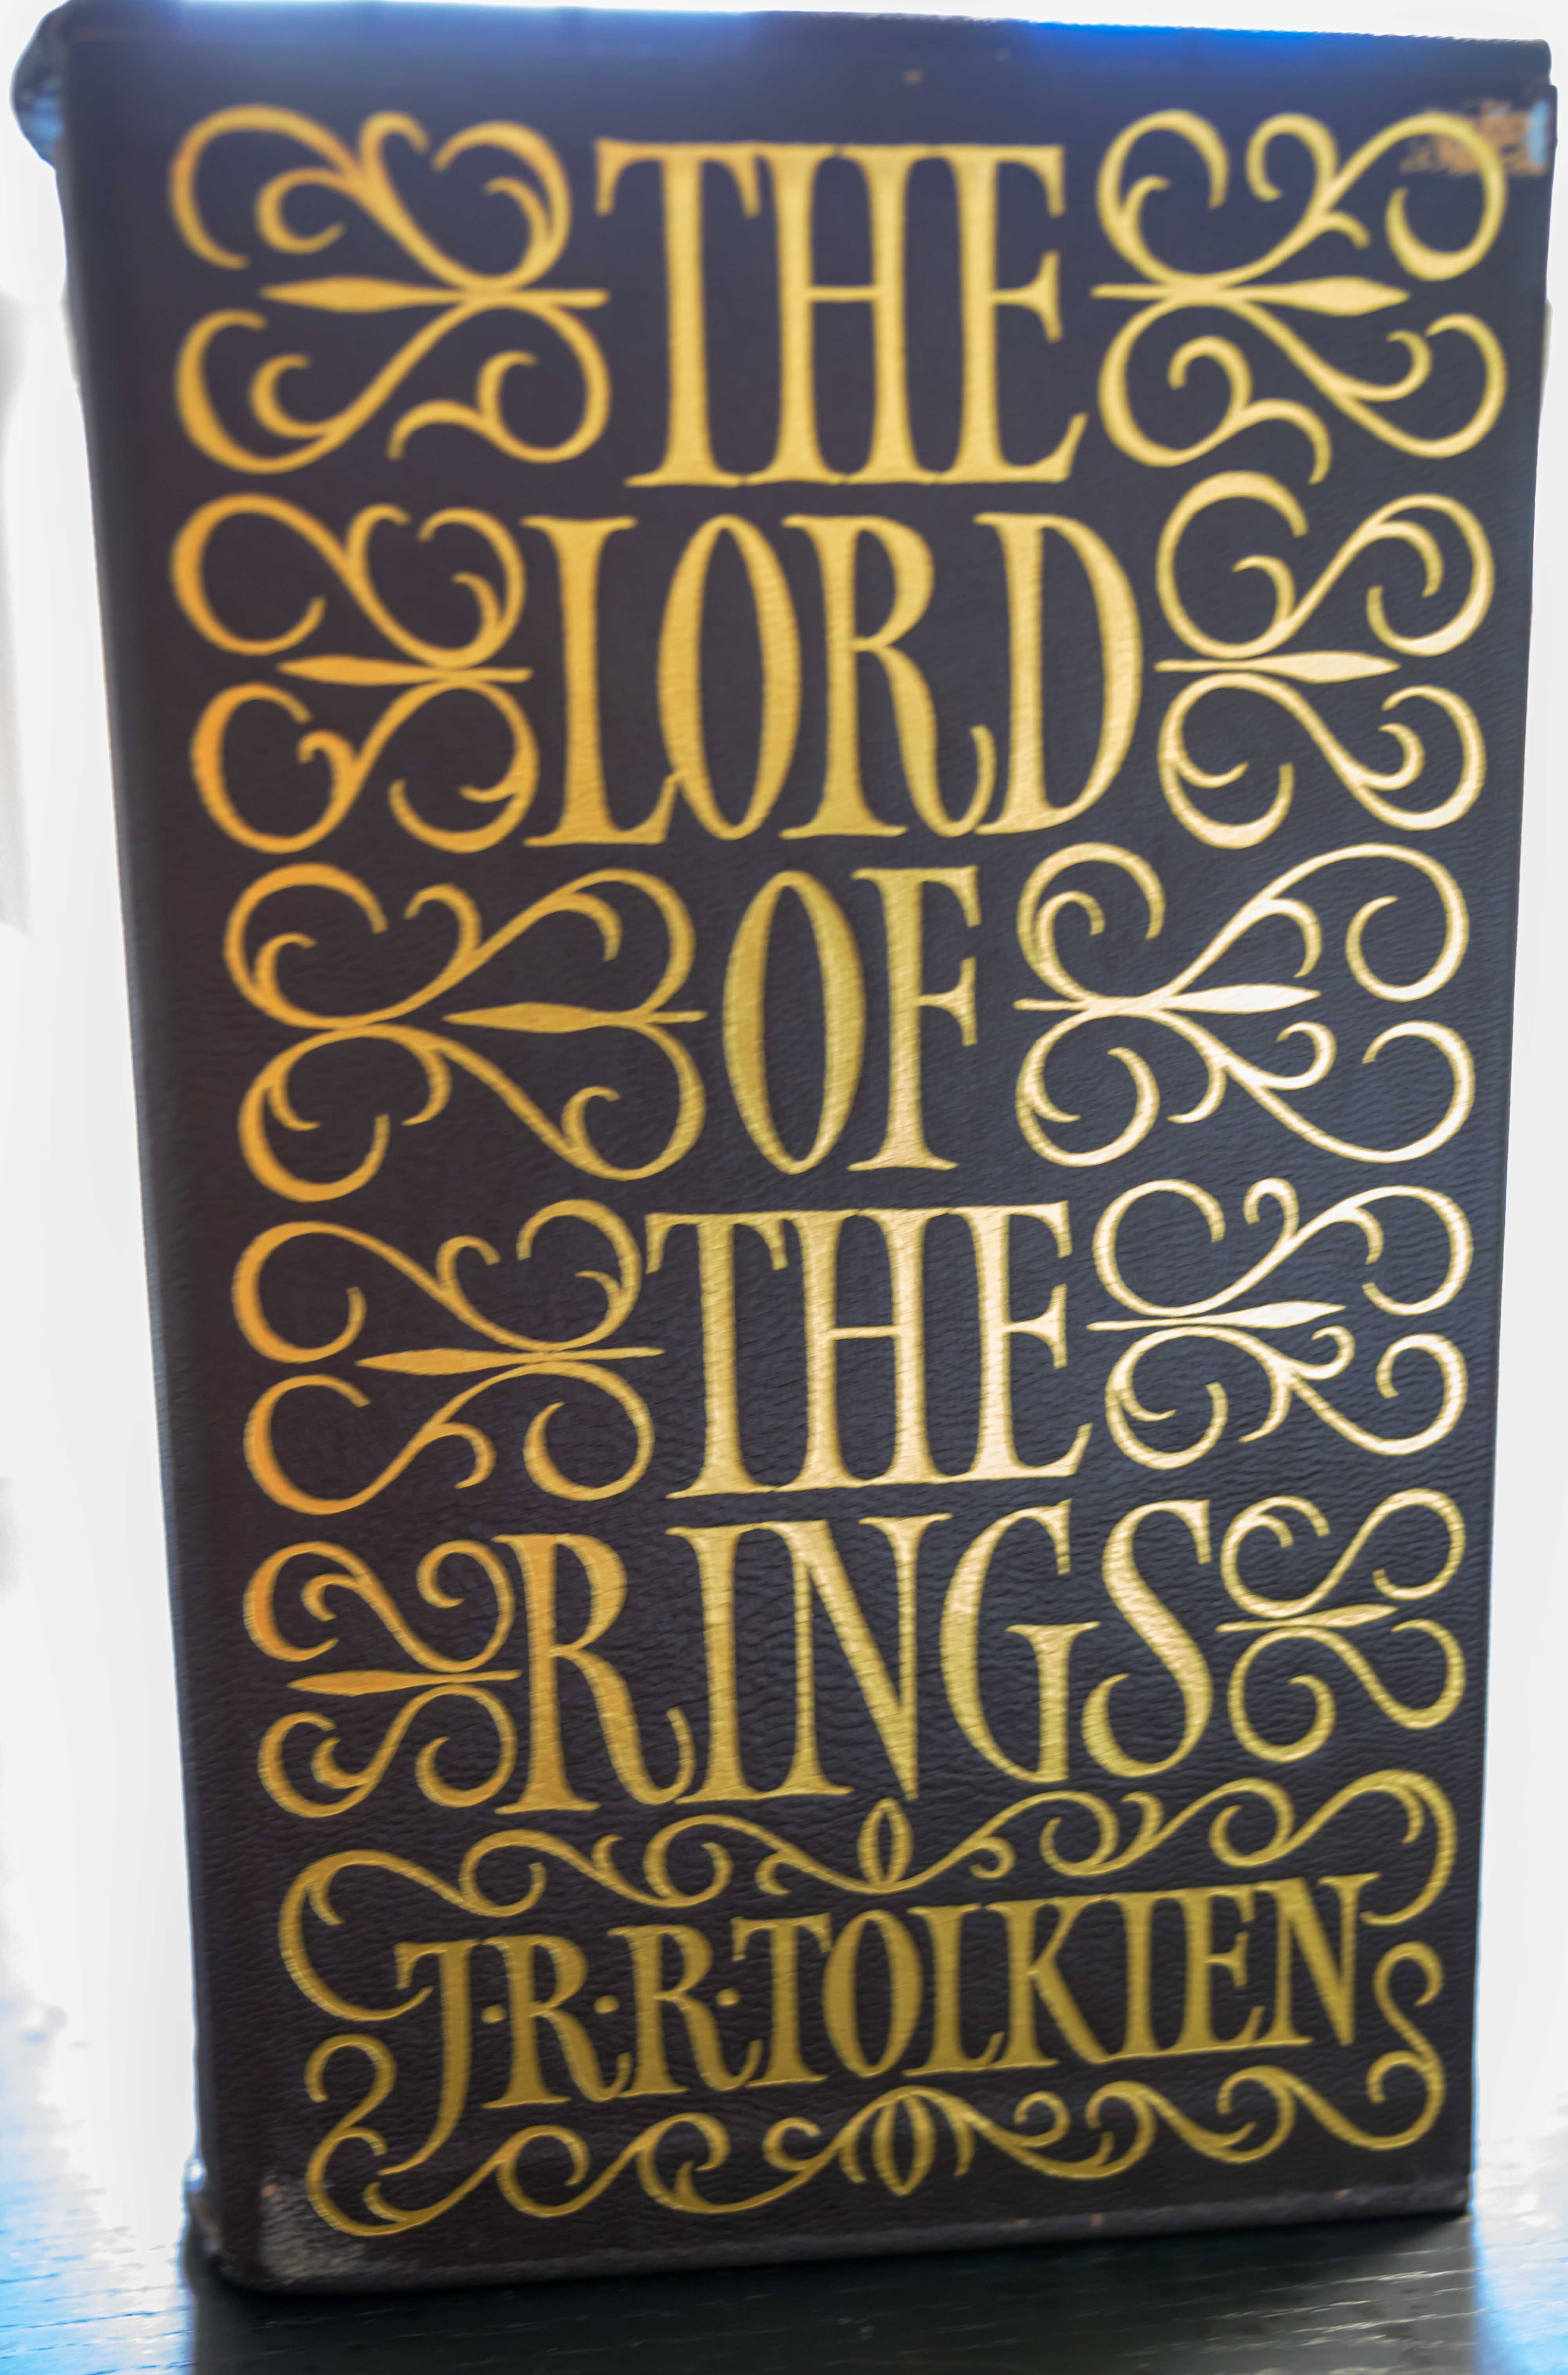 Folio Society Limited Numbered Editions, The Hobbit, The Lord of the Rings and The Silmarillion. All with Limitation Number #989 of 1750 3